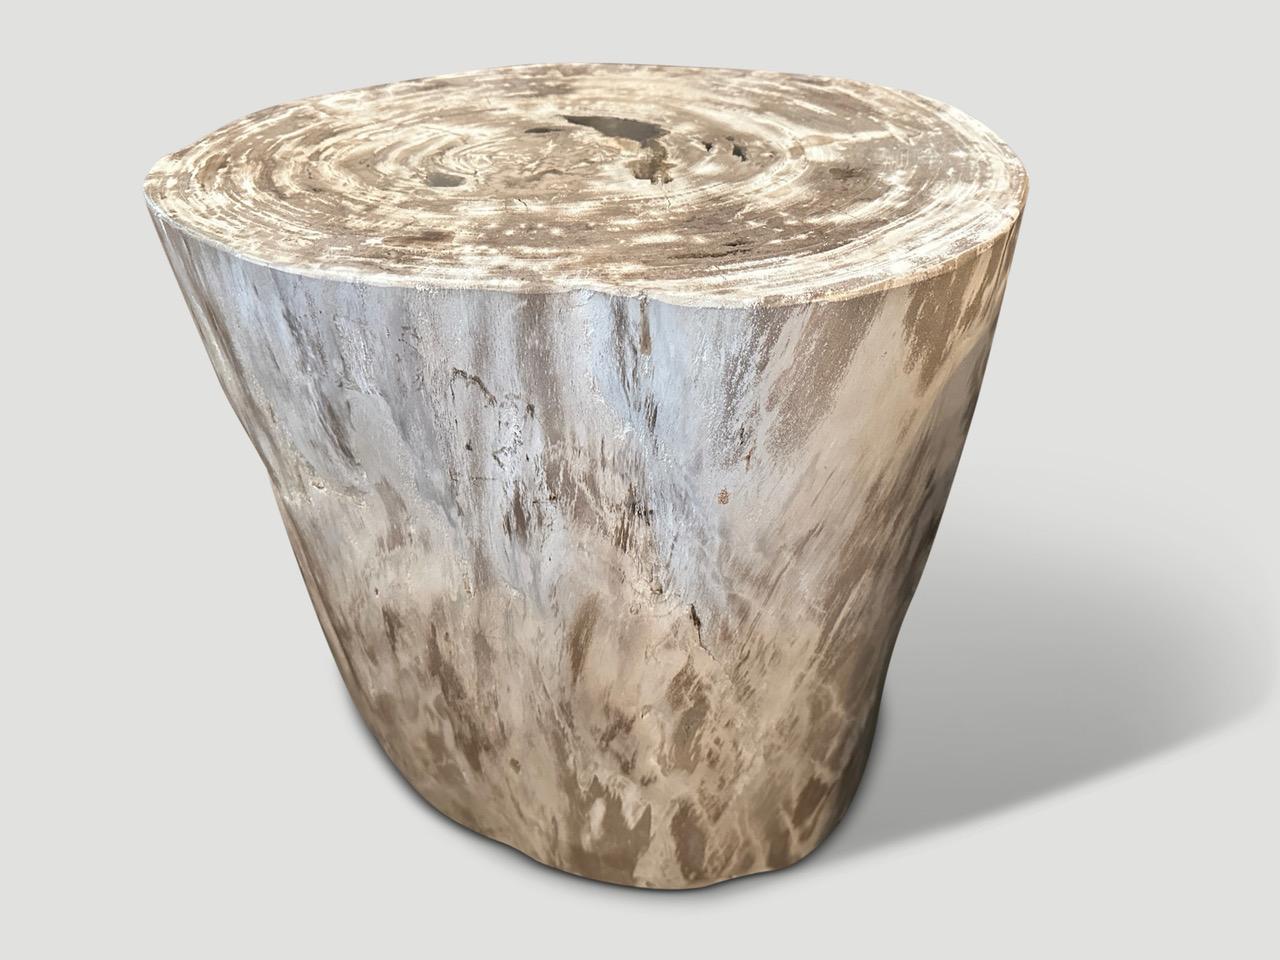 Impressive minimalist petrified wood side table. The pale tones are the hardest to source. It’s fascinating how Mother Nature produces these exquisite 40 million year old petrified teak logs with such contrasting colors and natural patterns